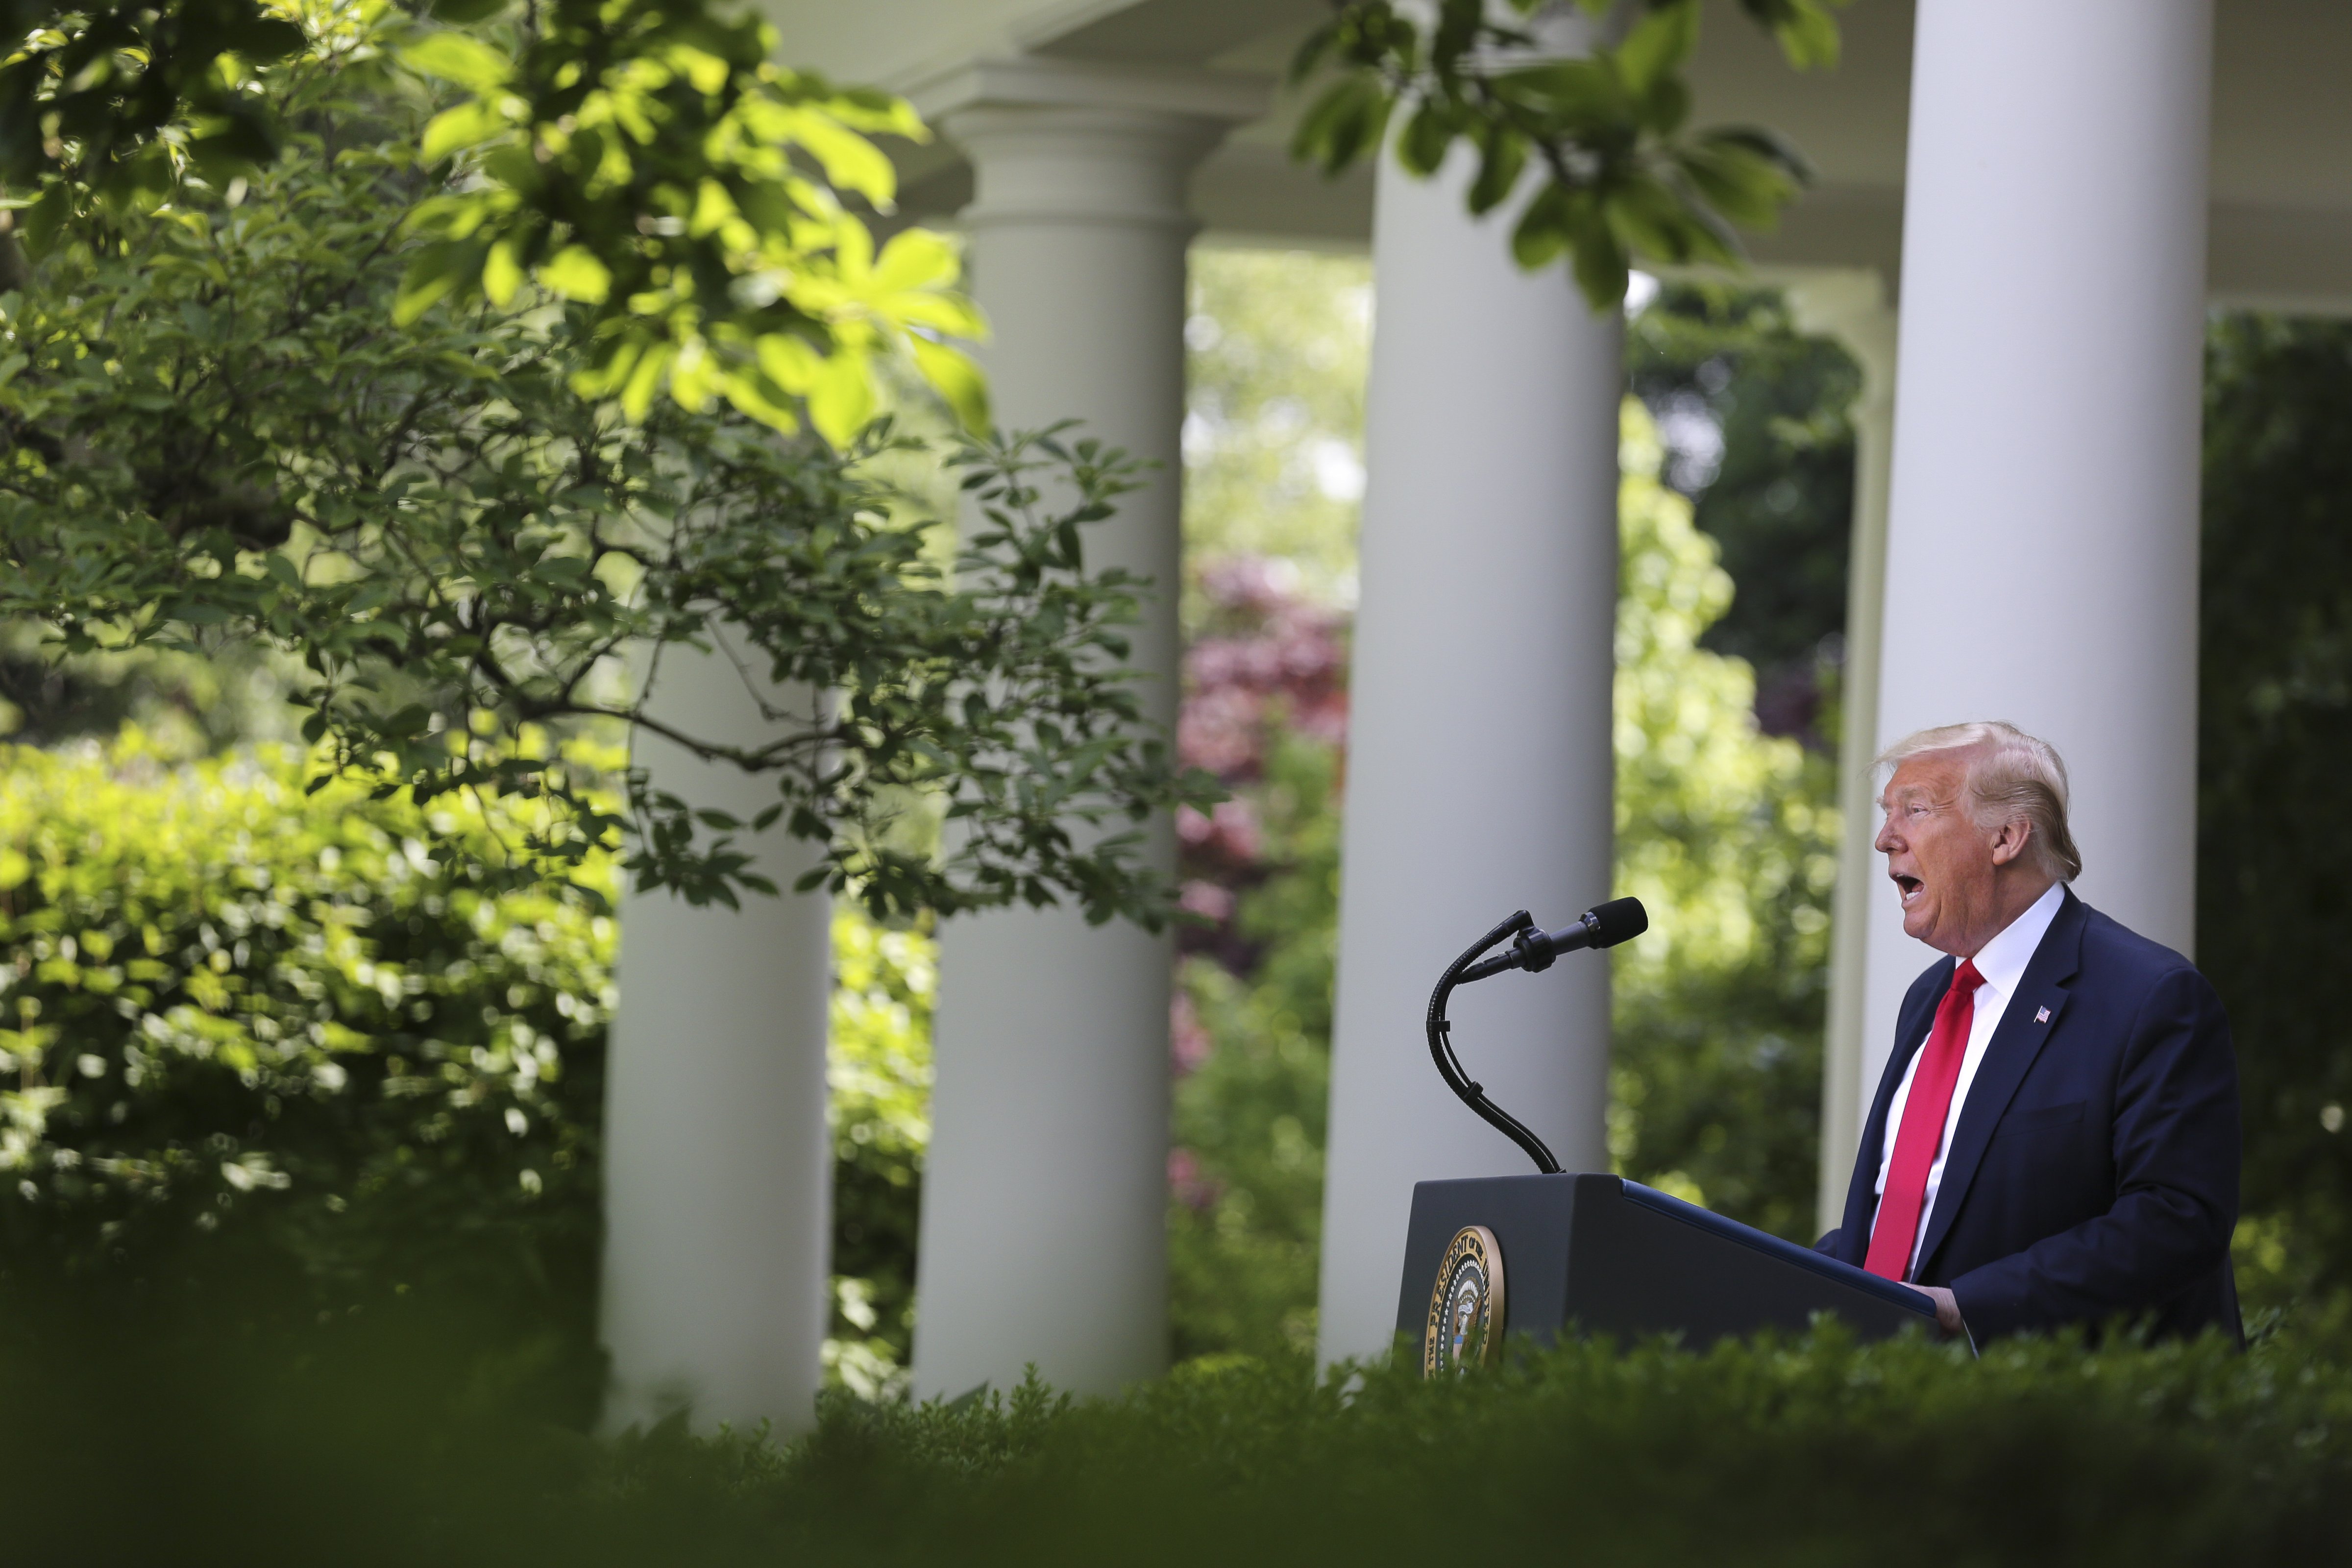 President Donald Trump speaks during an event at the White House in Washington, D.C. on May 26, 2020. (Oliver Contreras—Bloomberg/Getty Images)